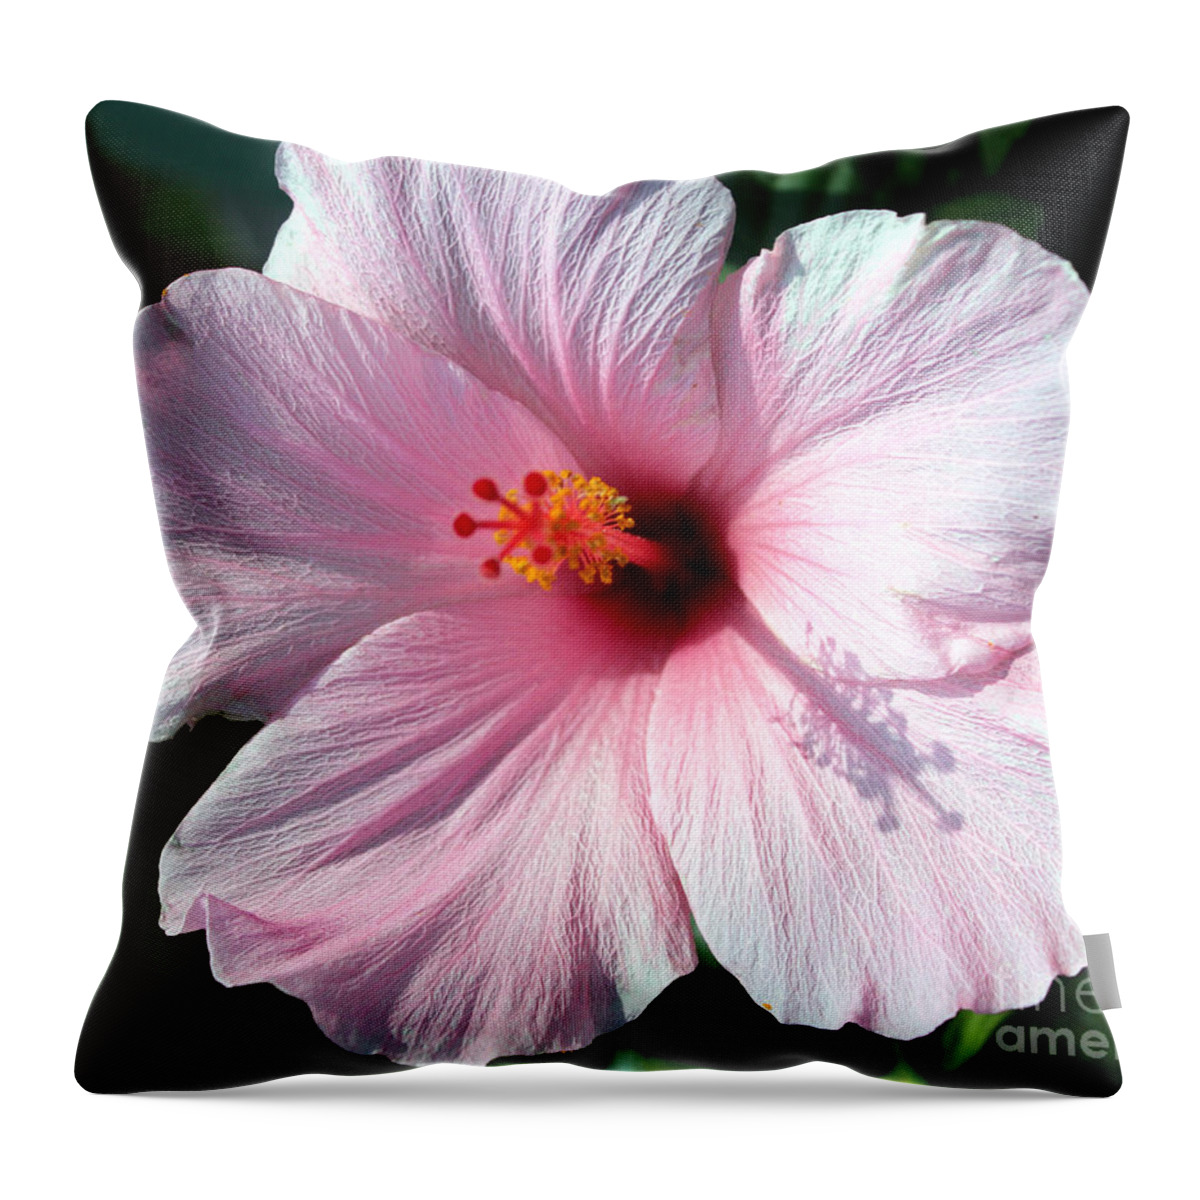 Pale Pink Hibiscus Throw Pillow featuring the photograph Pale Pink Hibiscus by Kathy White